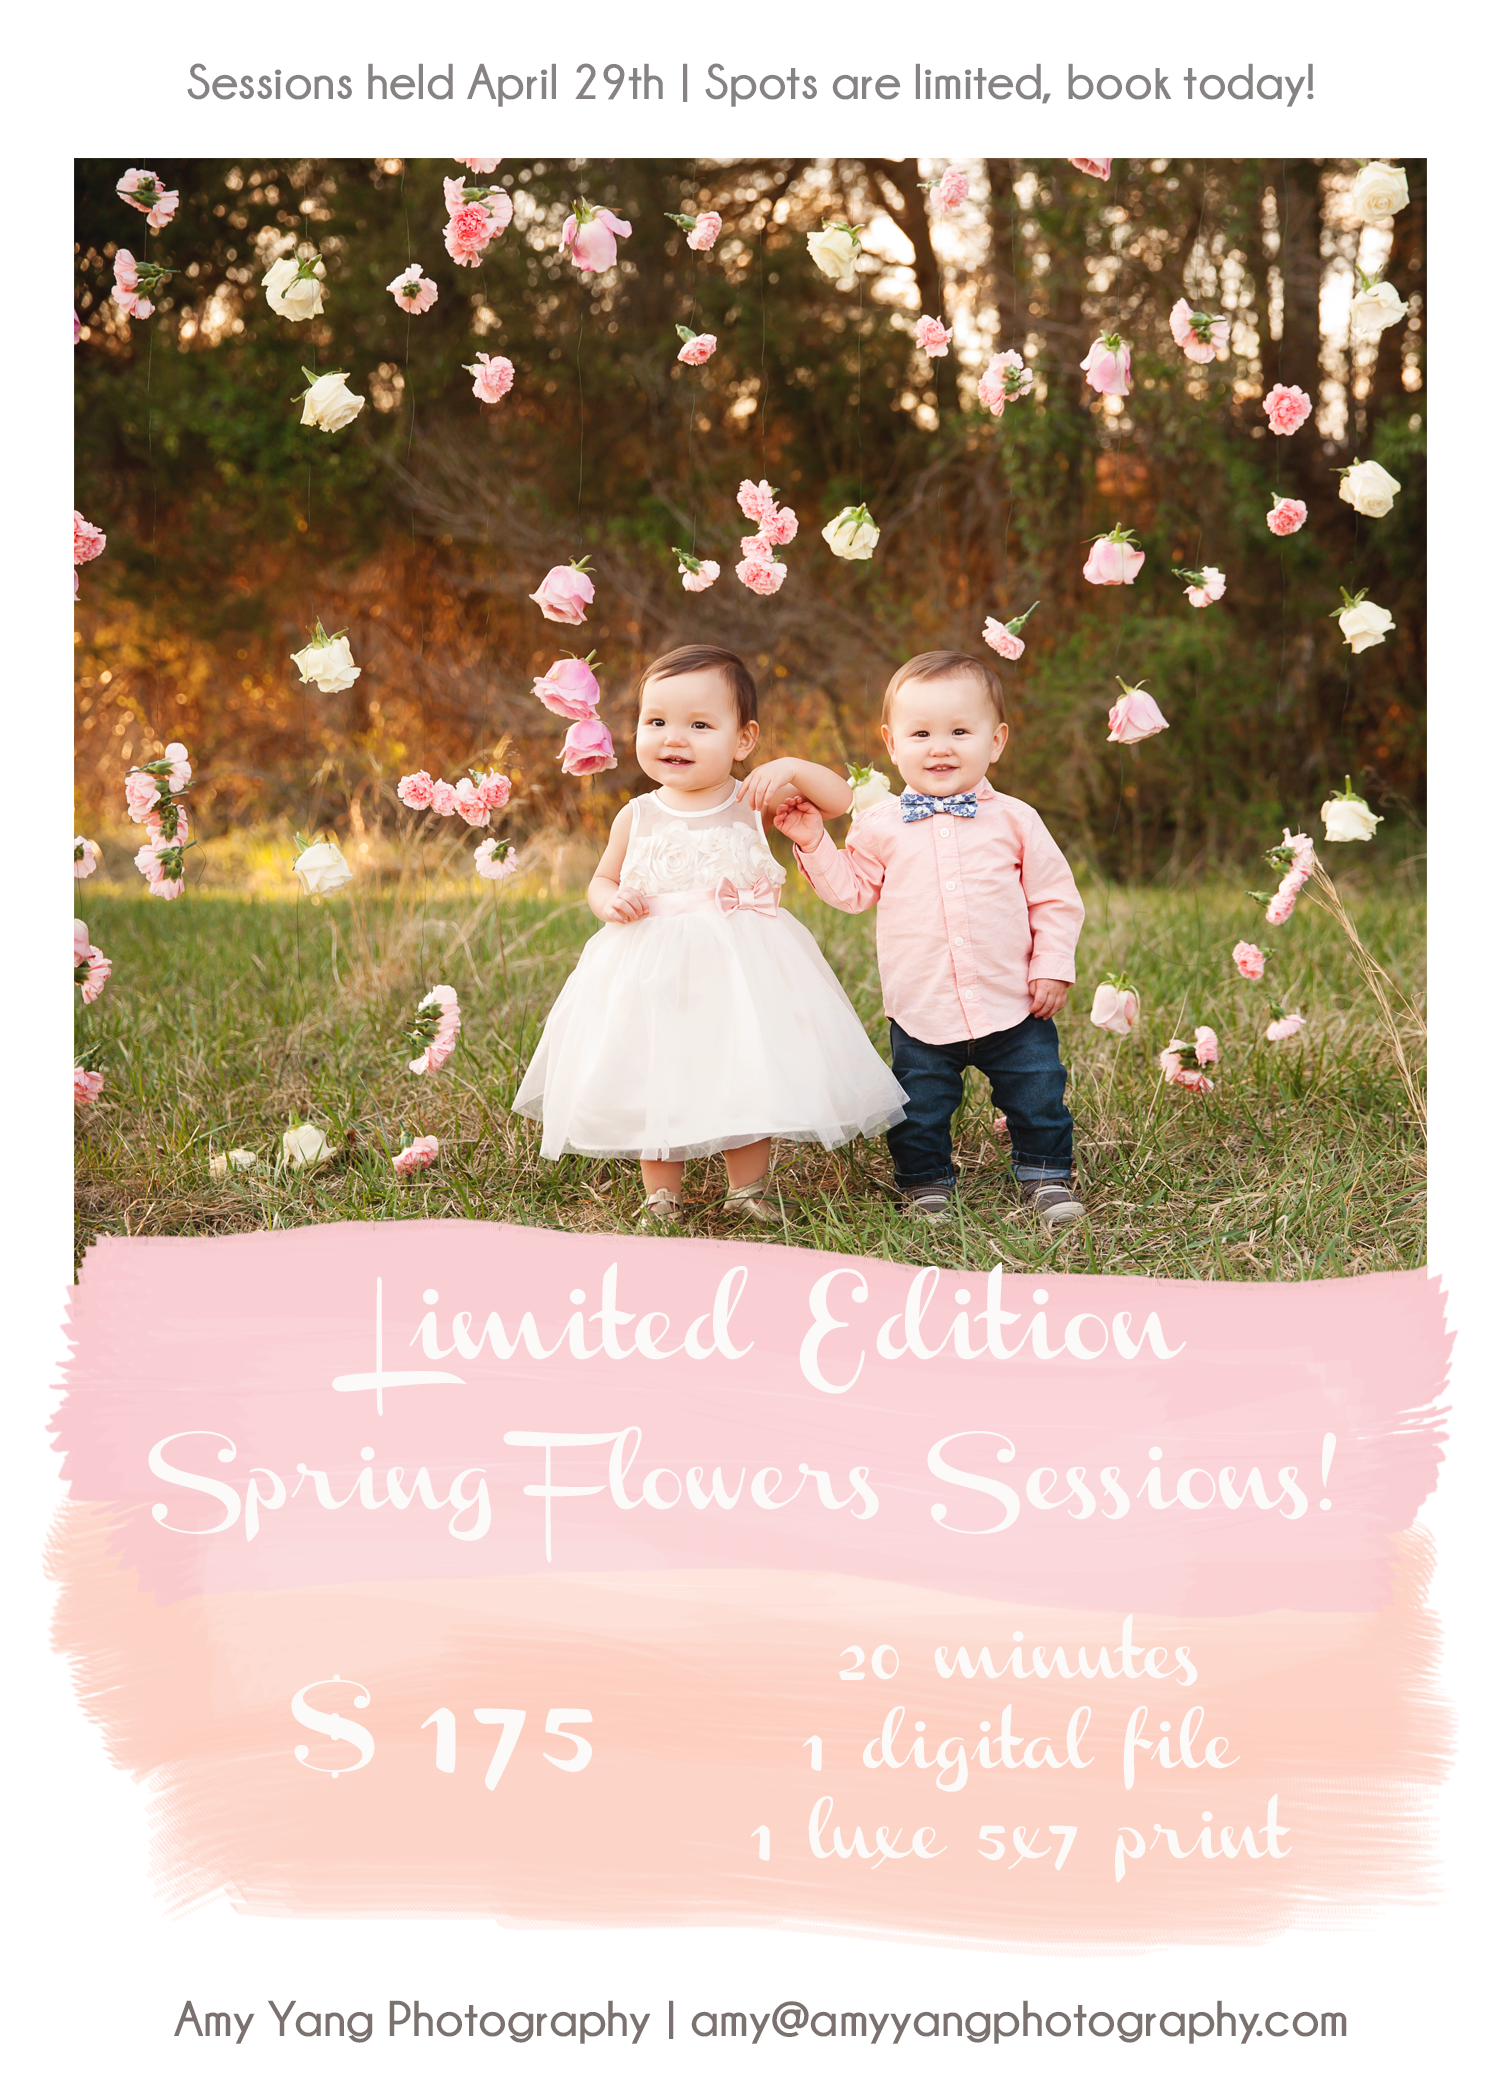 Limited Edition Spring Flowers Sessions